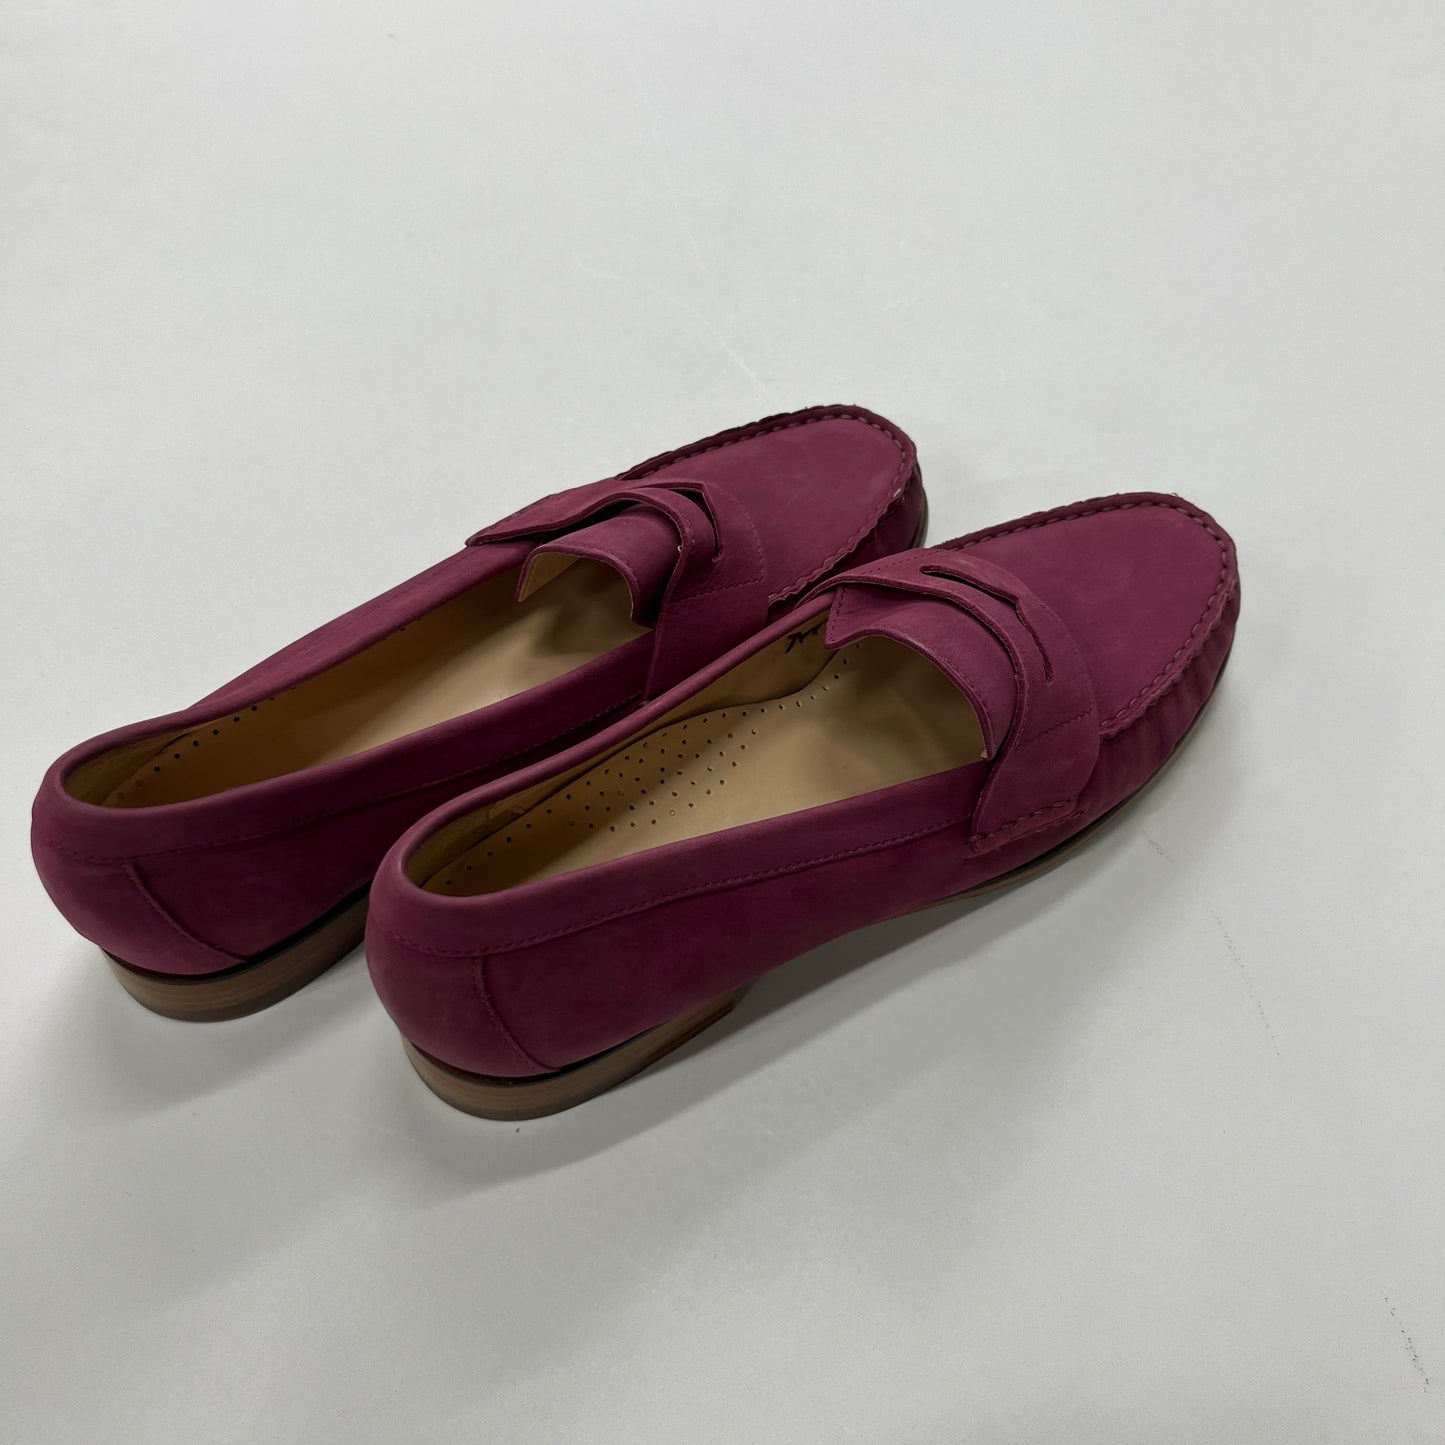 Plum Shoes Flats Loafer Oxford Cole-haan, Size 8